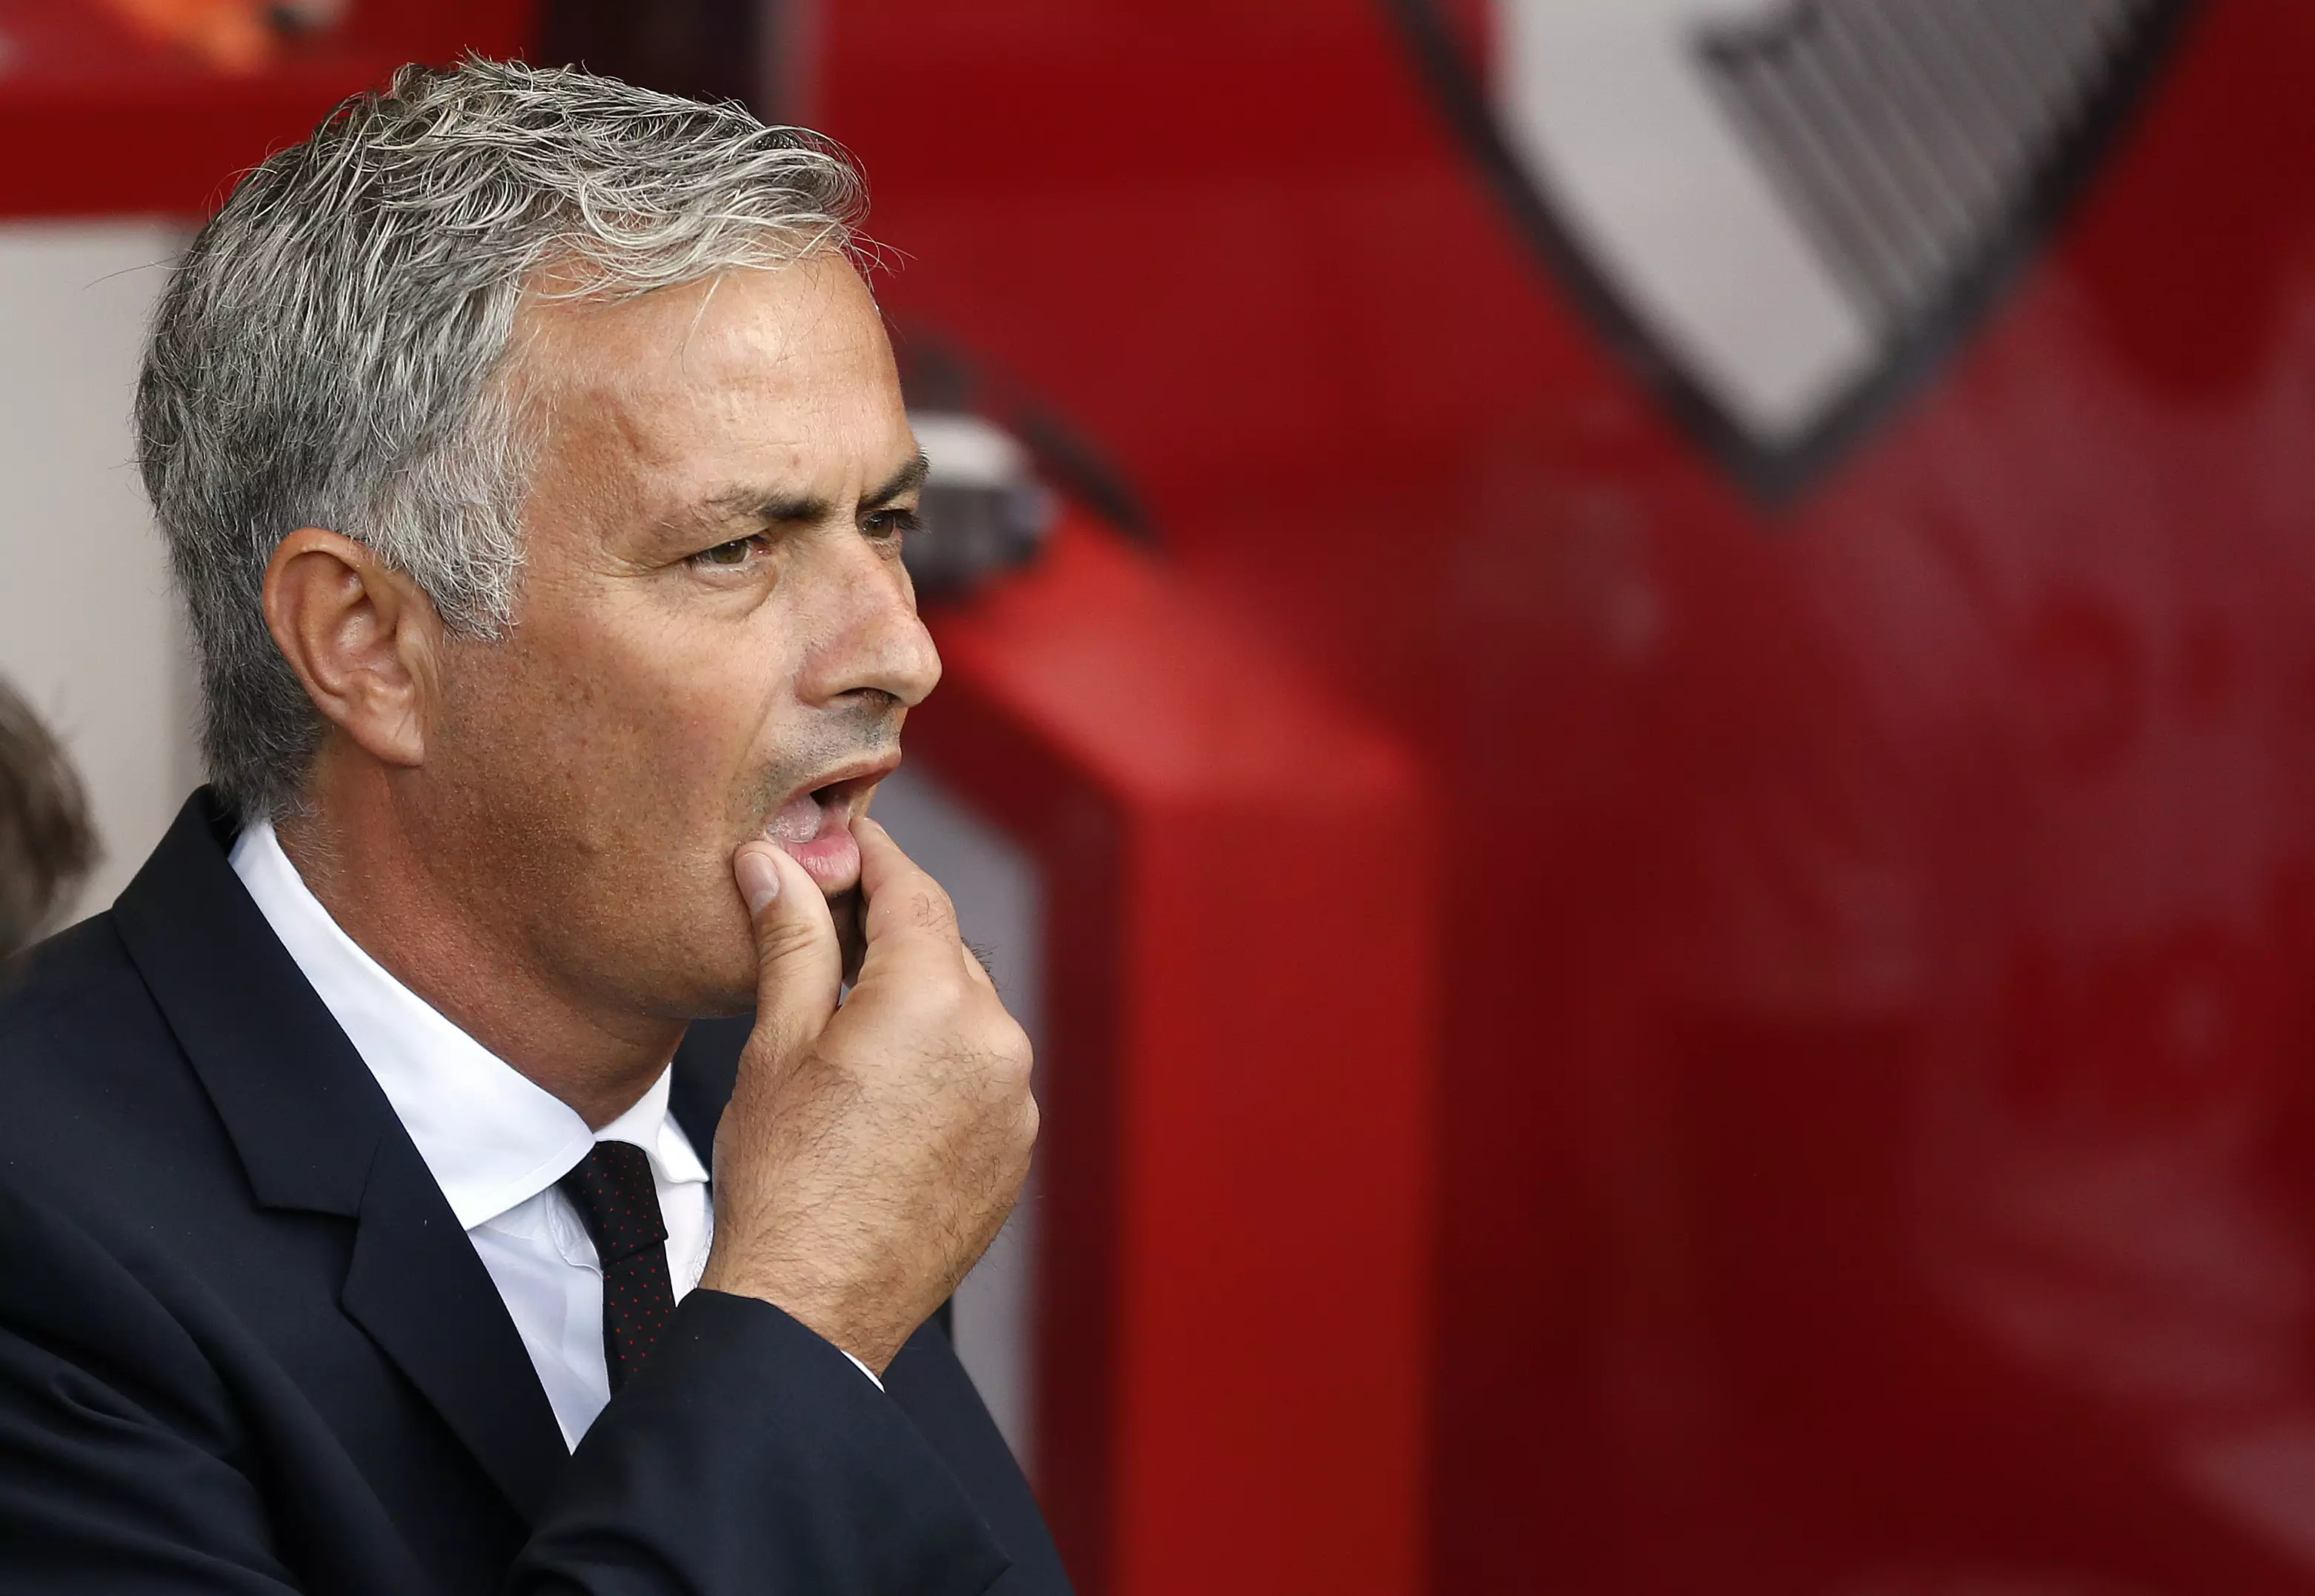 Has Jose Mourinho Already Fallen Out With Man United Board?